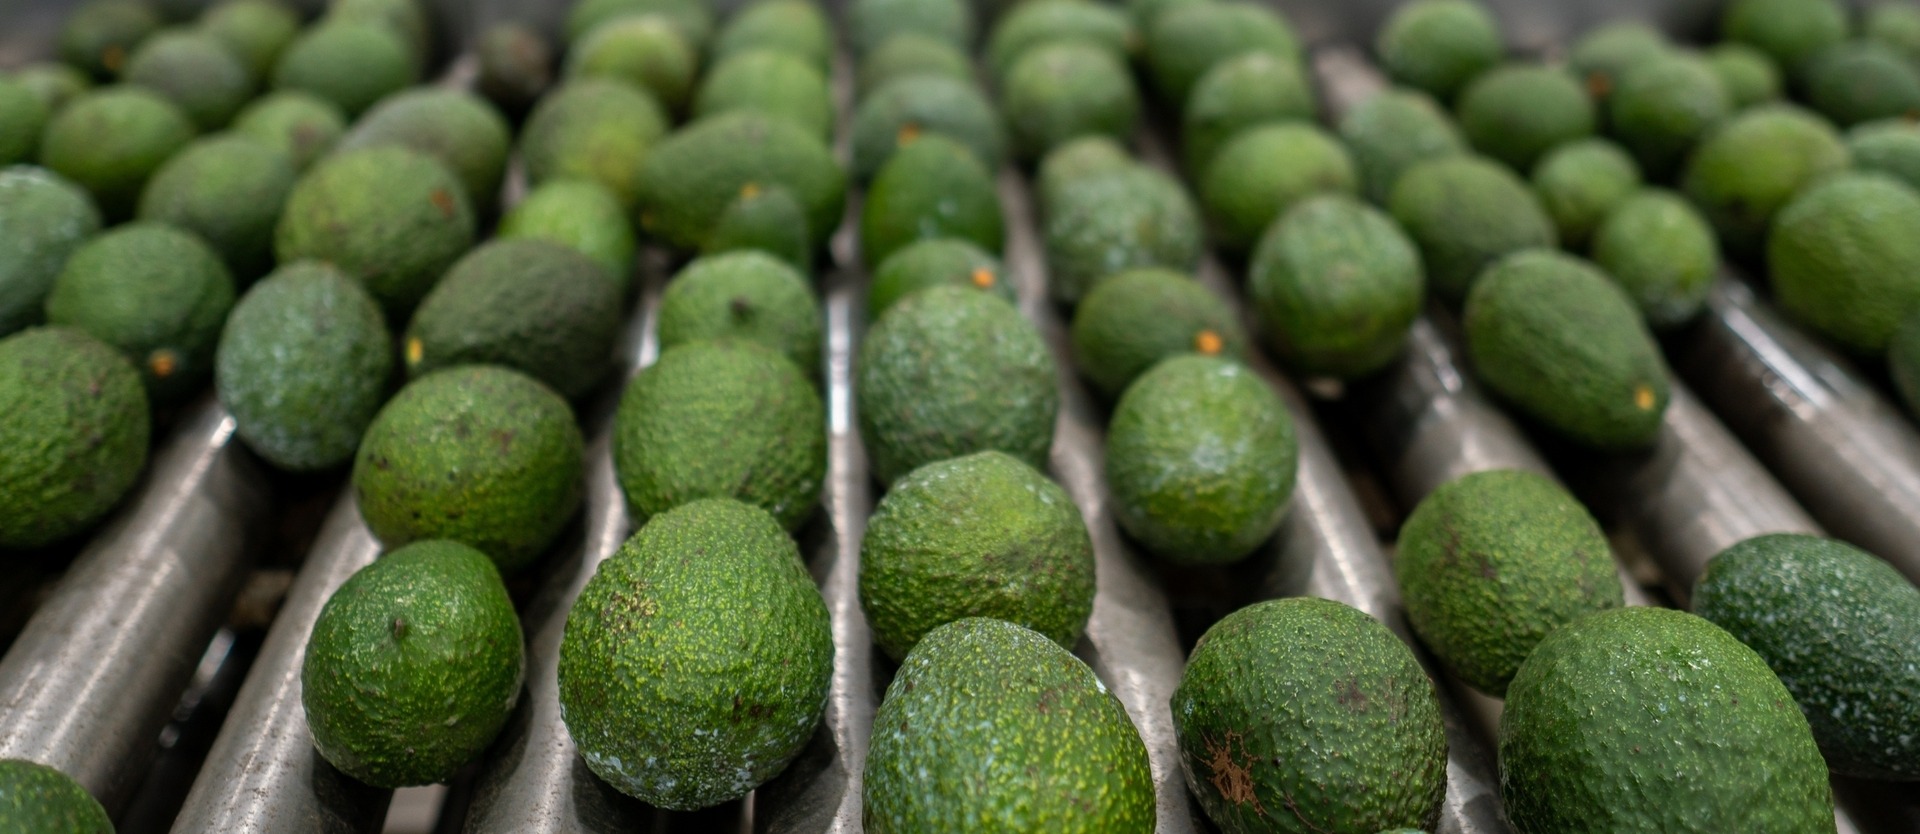 Avocados on conveyor belt in food production facility.